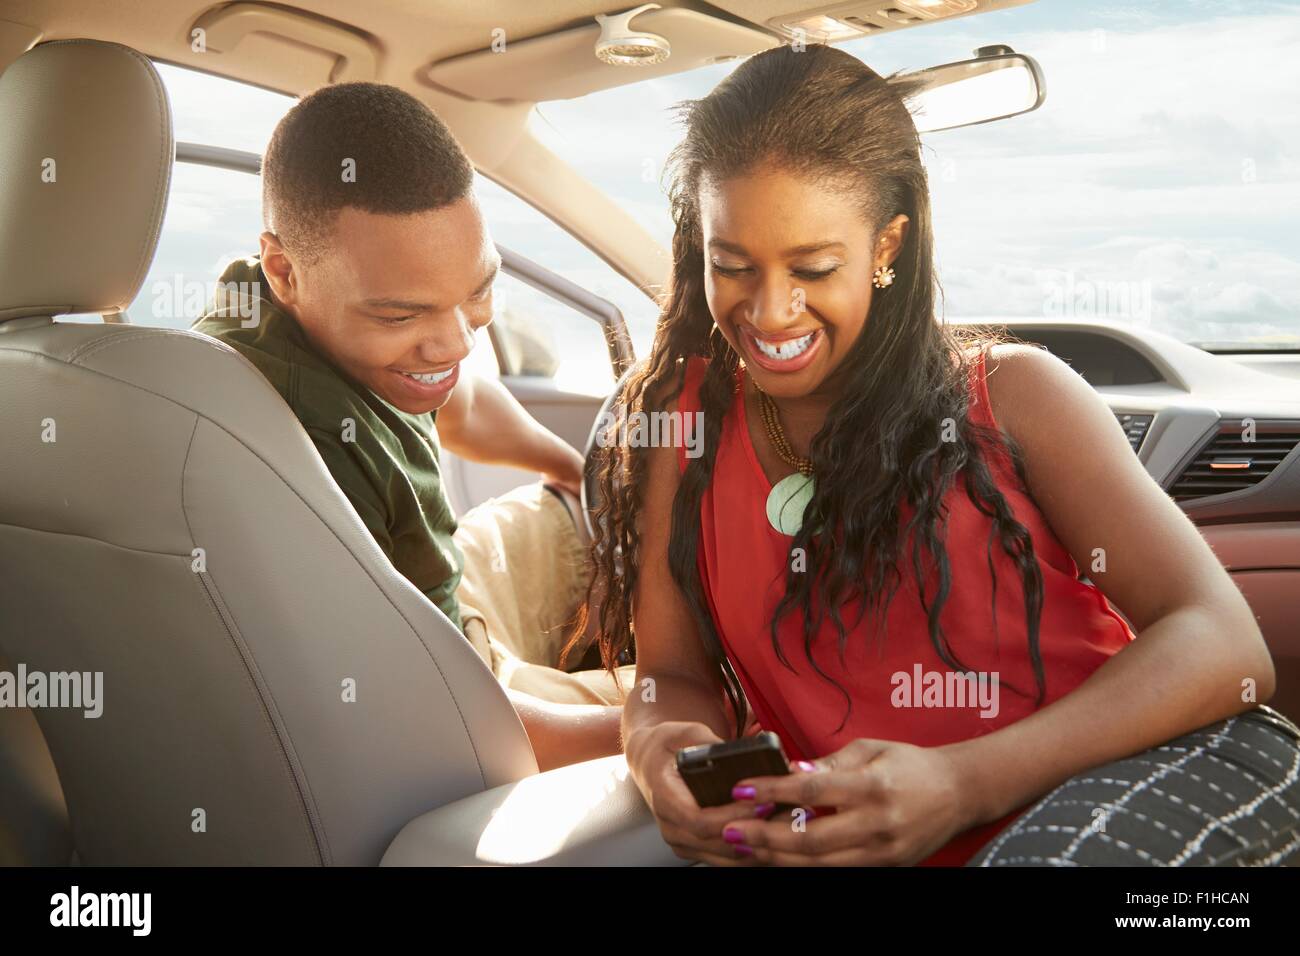 Young couple sitting in car looking at smartphone Banque D'Images